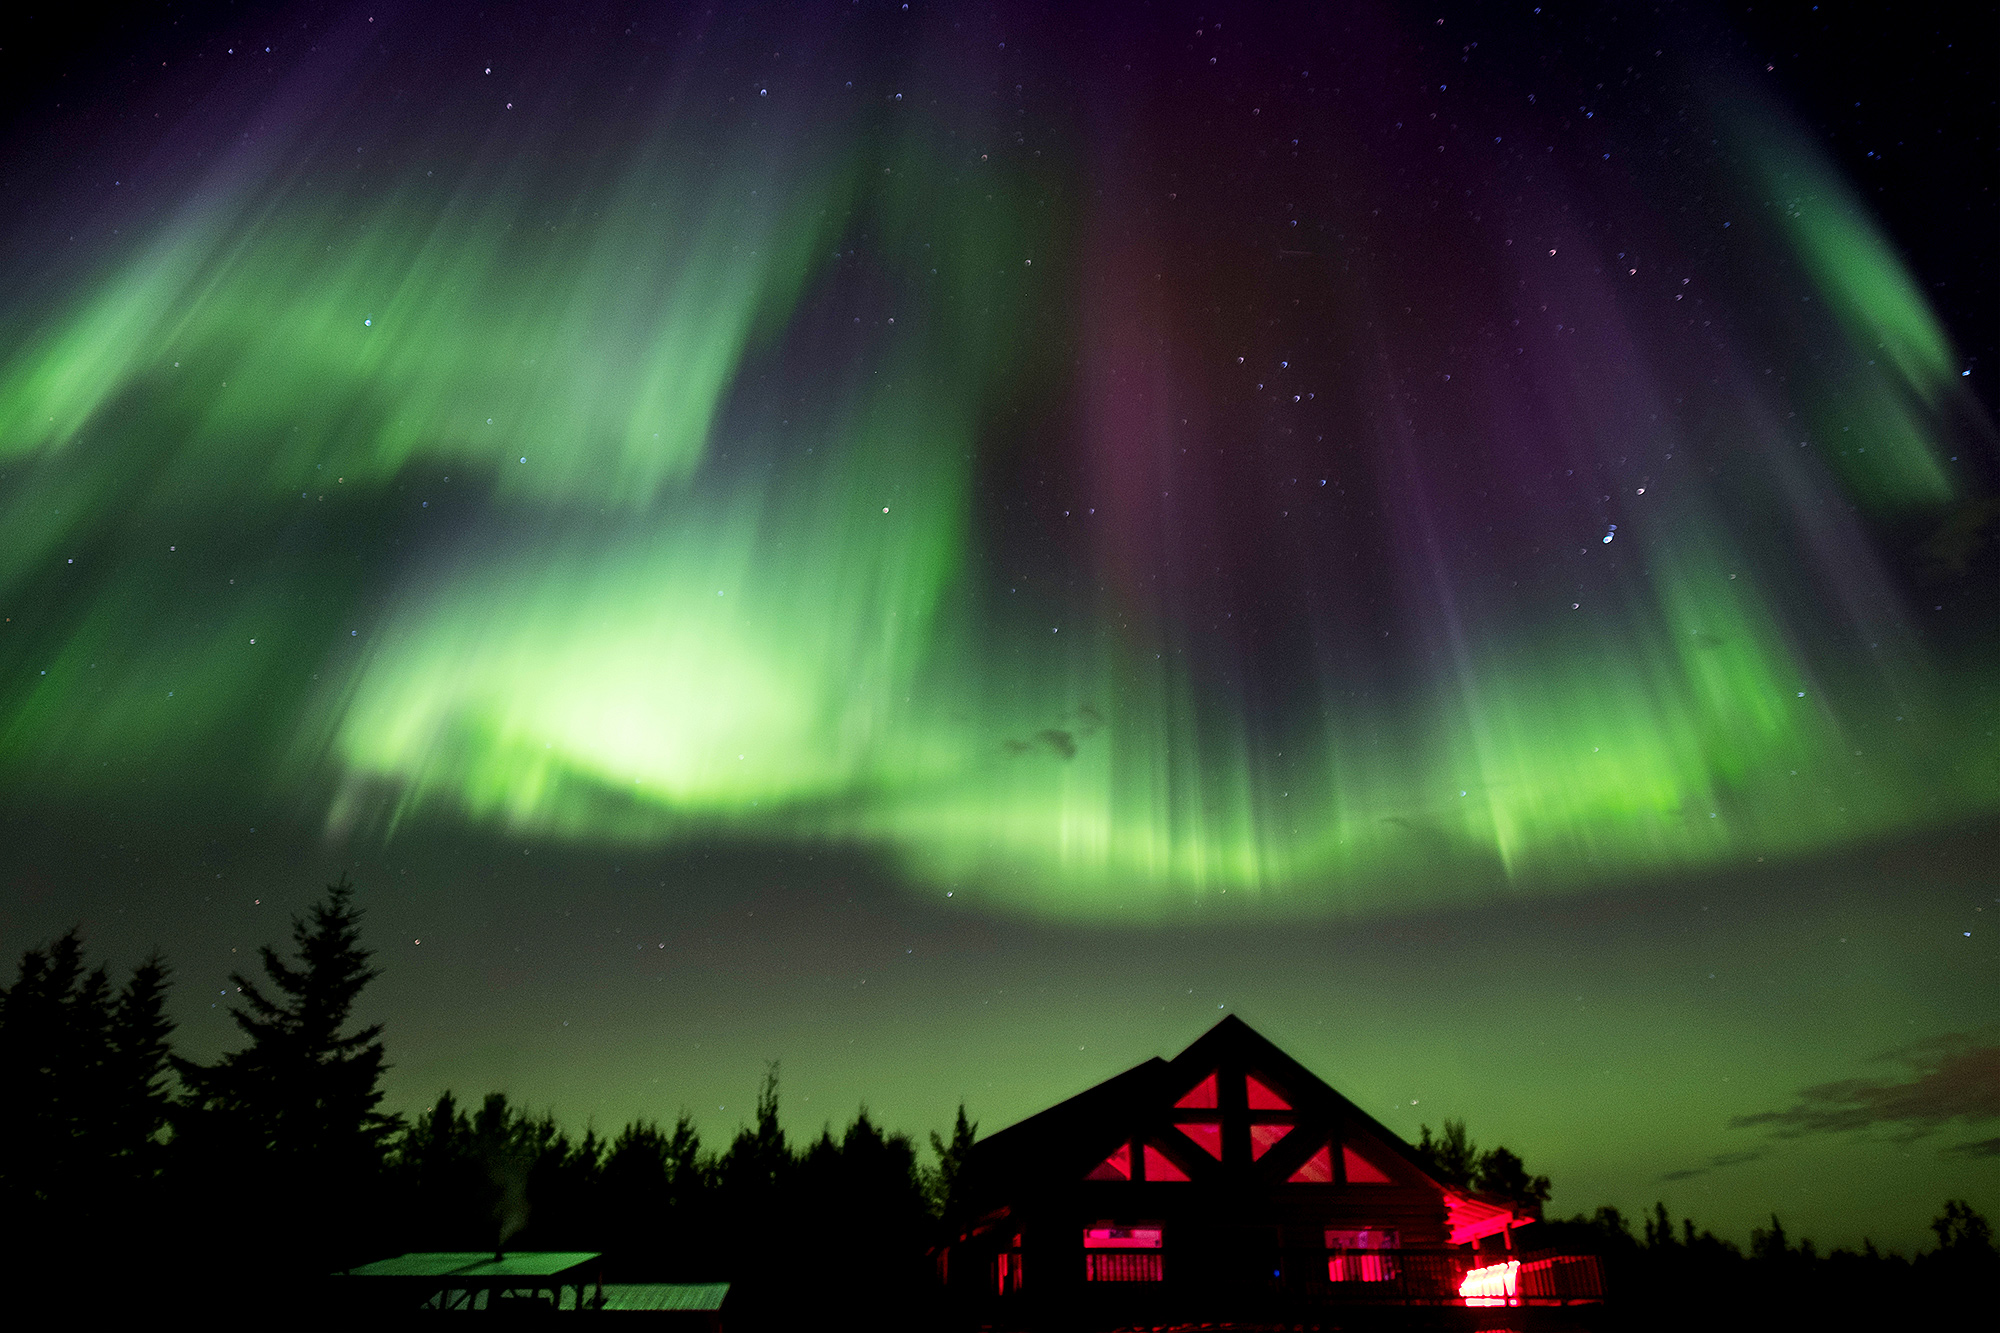 a cabin glows a warm red beneath the green and purple Aurora Borealis lights in a starry night sky